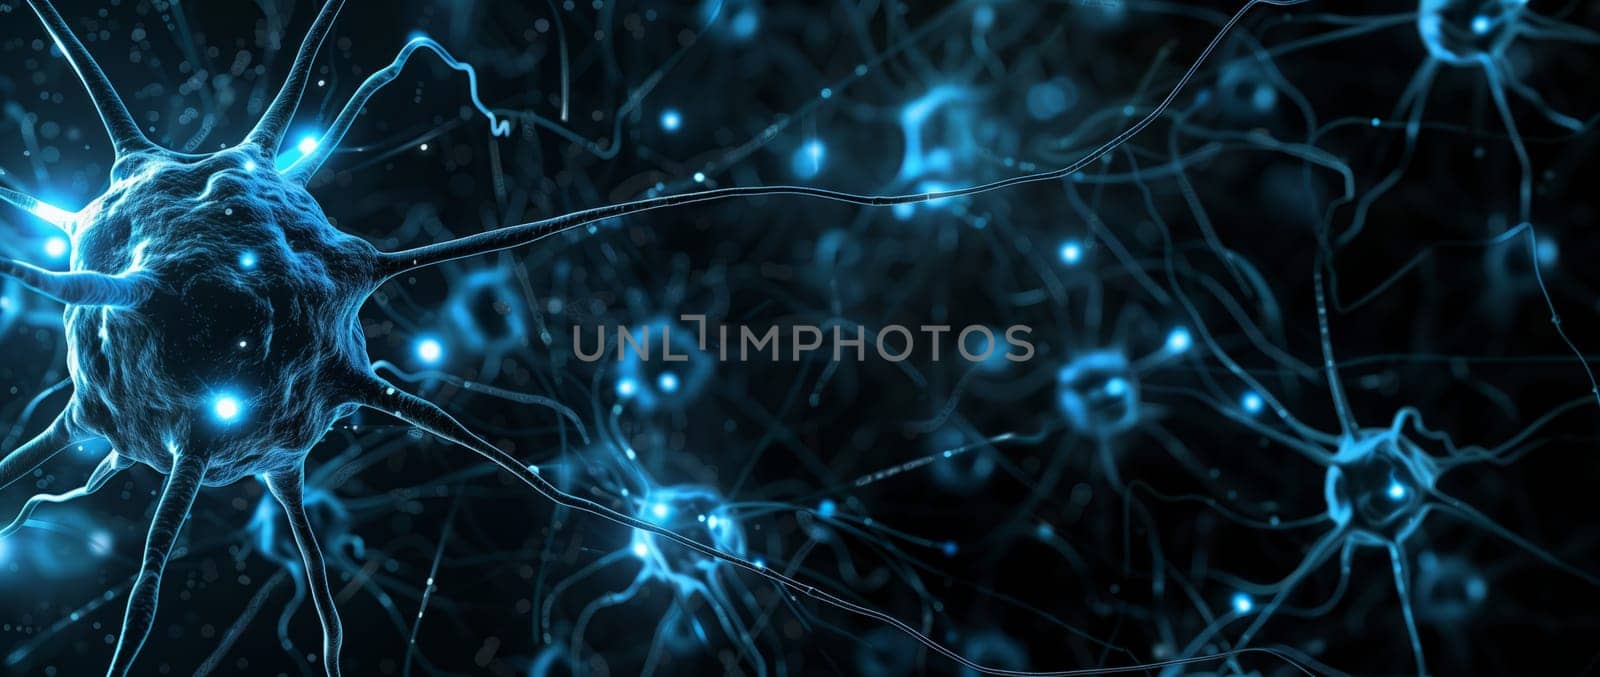 An electric blue computergenerated image resembling a network of nerve cells, exhibiting a pattern similar to a cosmic event in space, a mesmerizing blend of art and science